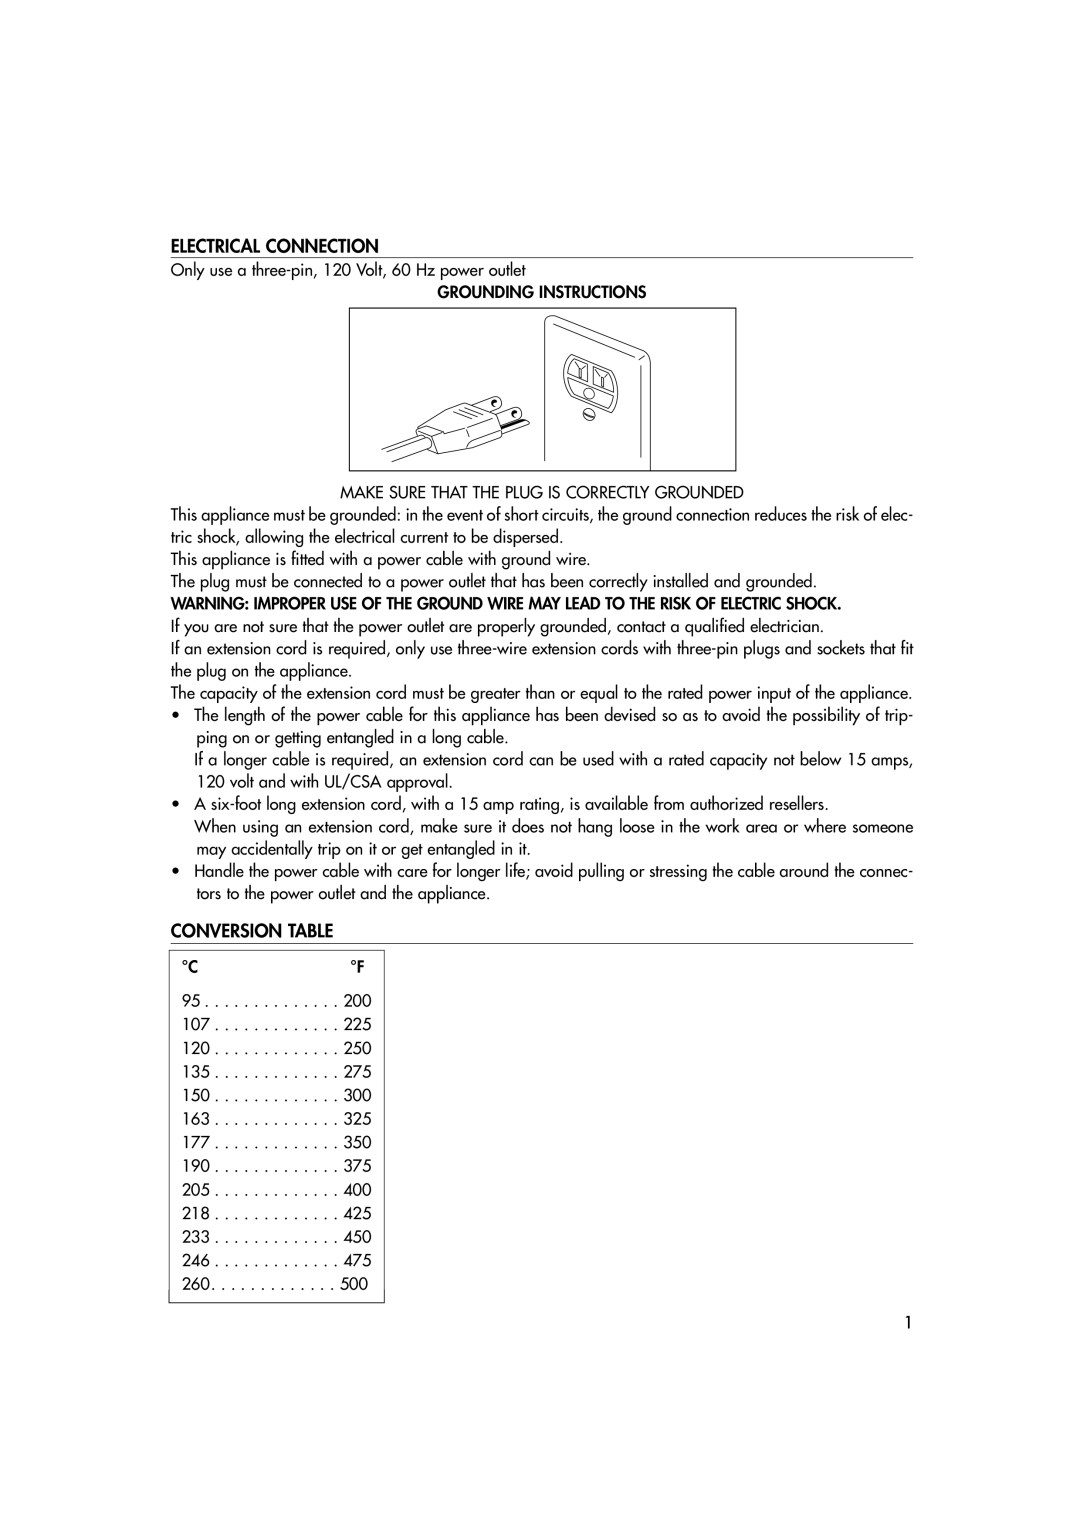 DeLonghi EO1270 B manual Electrical Connection, Conversion Table 